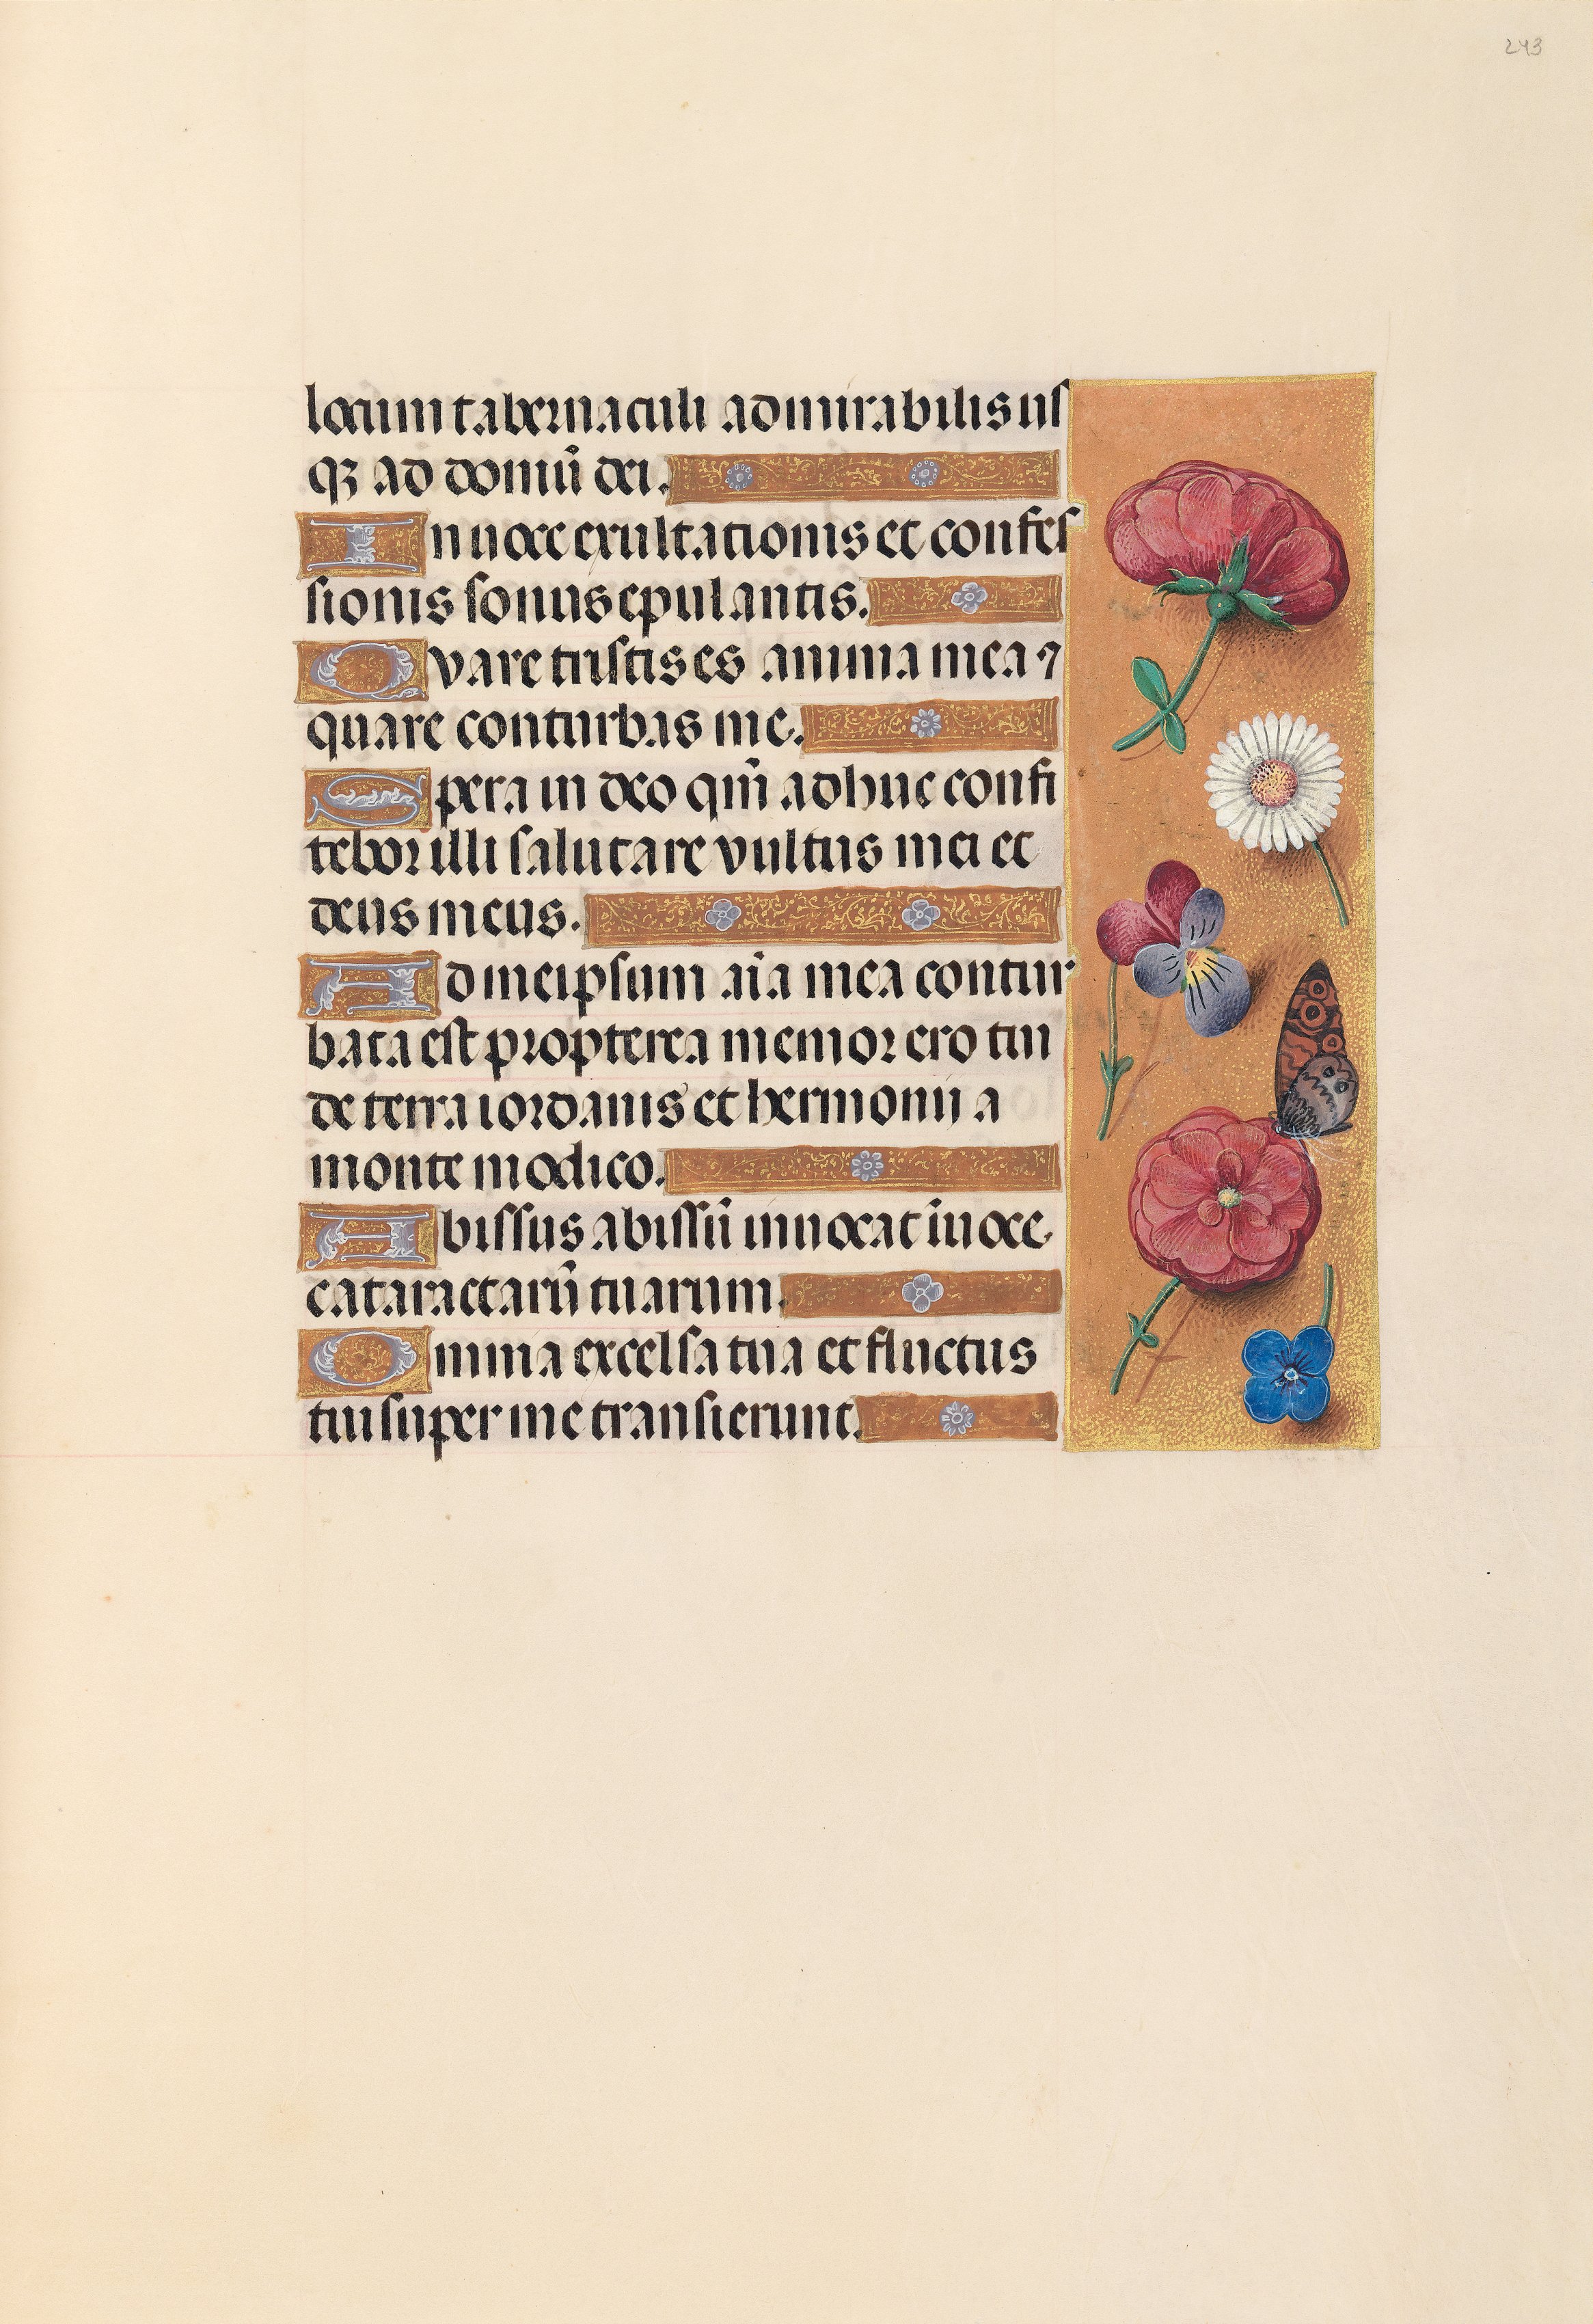 Hours of Queen Isabella the Catholic, Queen of Spain:  Fol. 243r